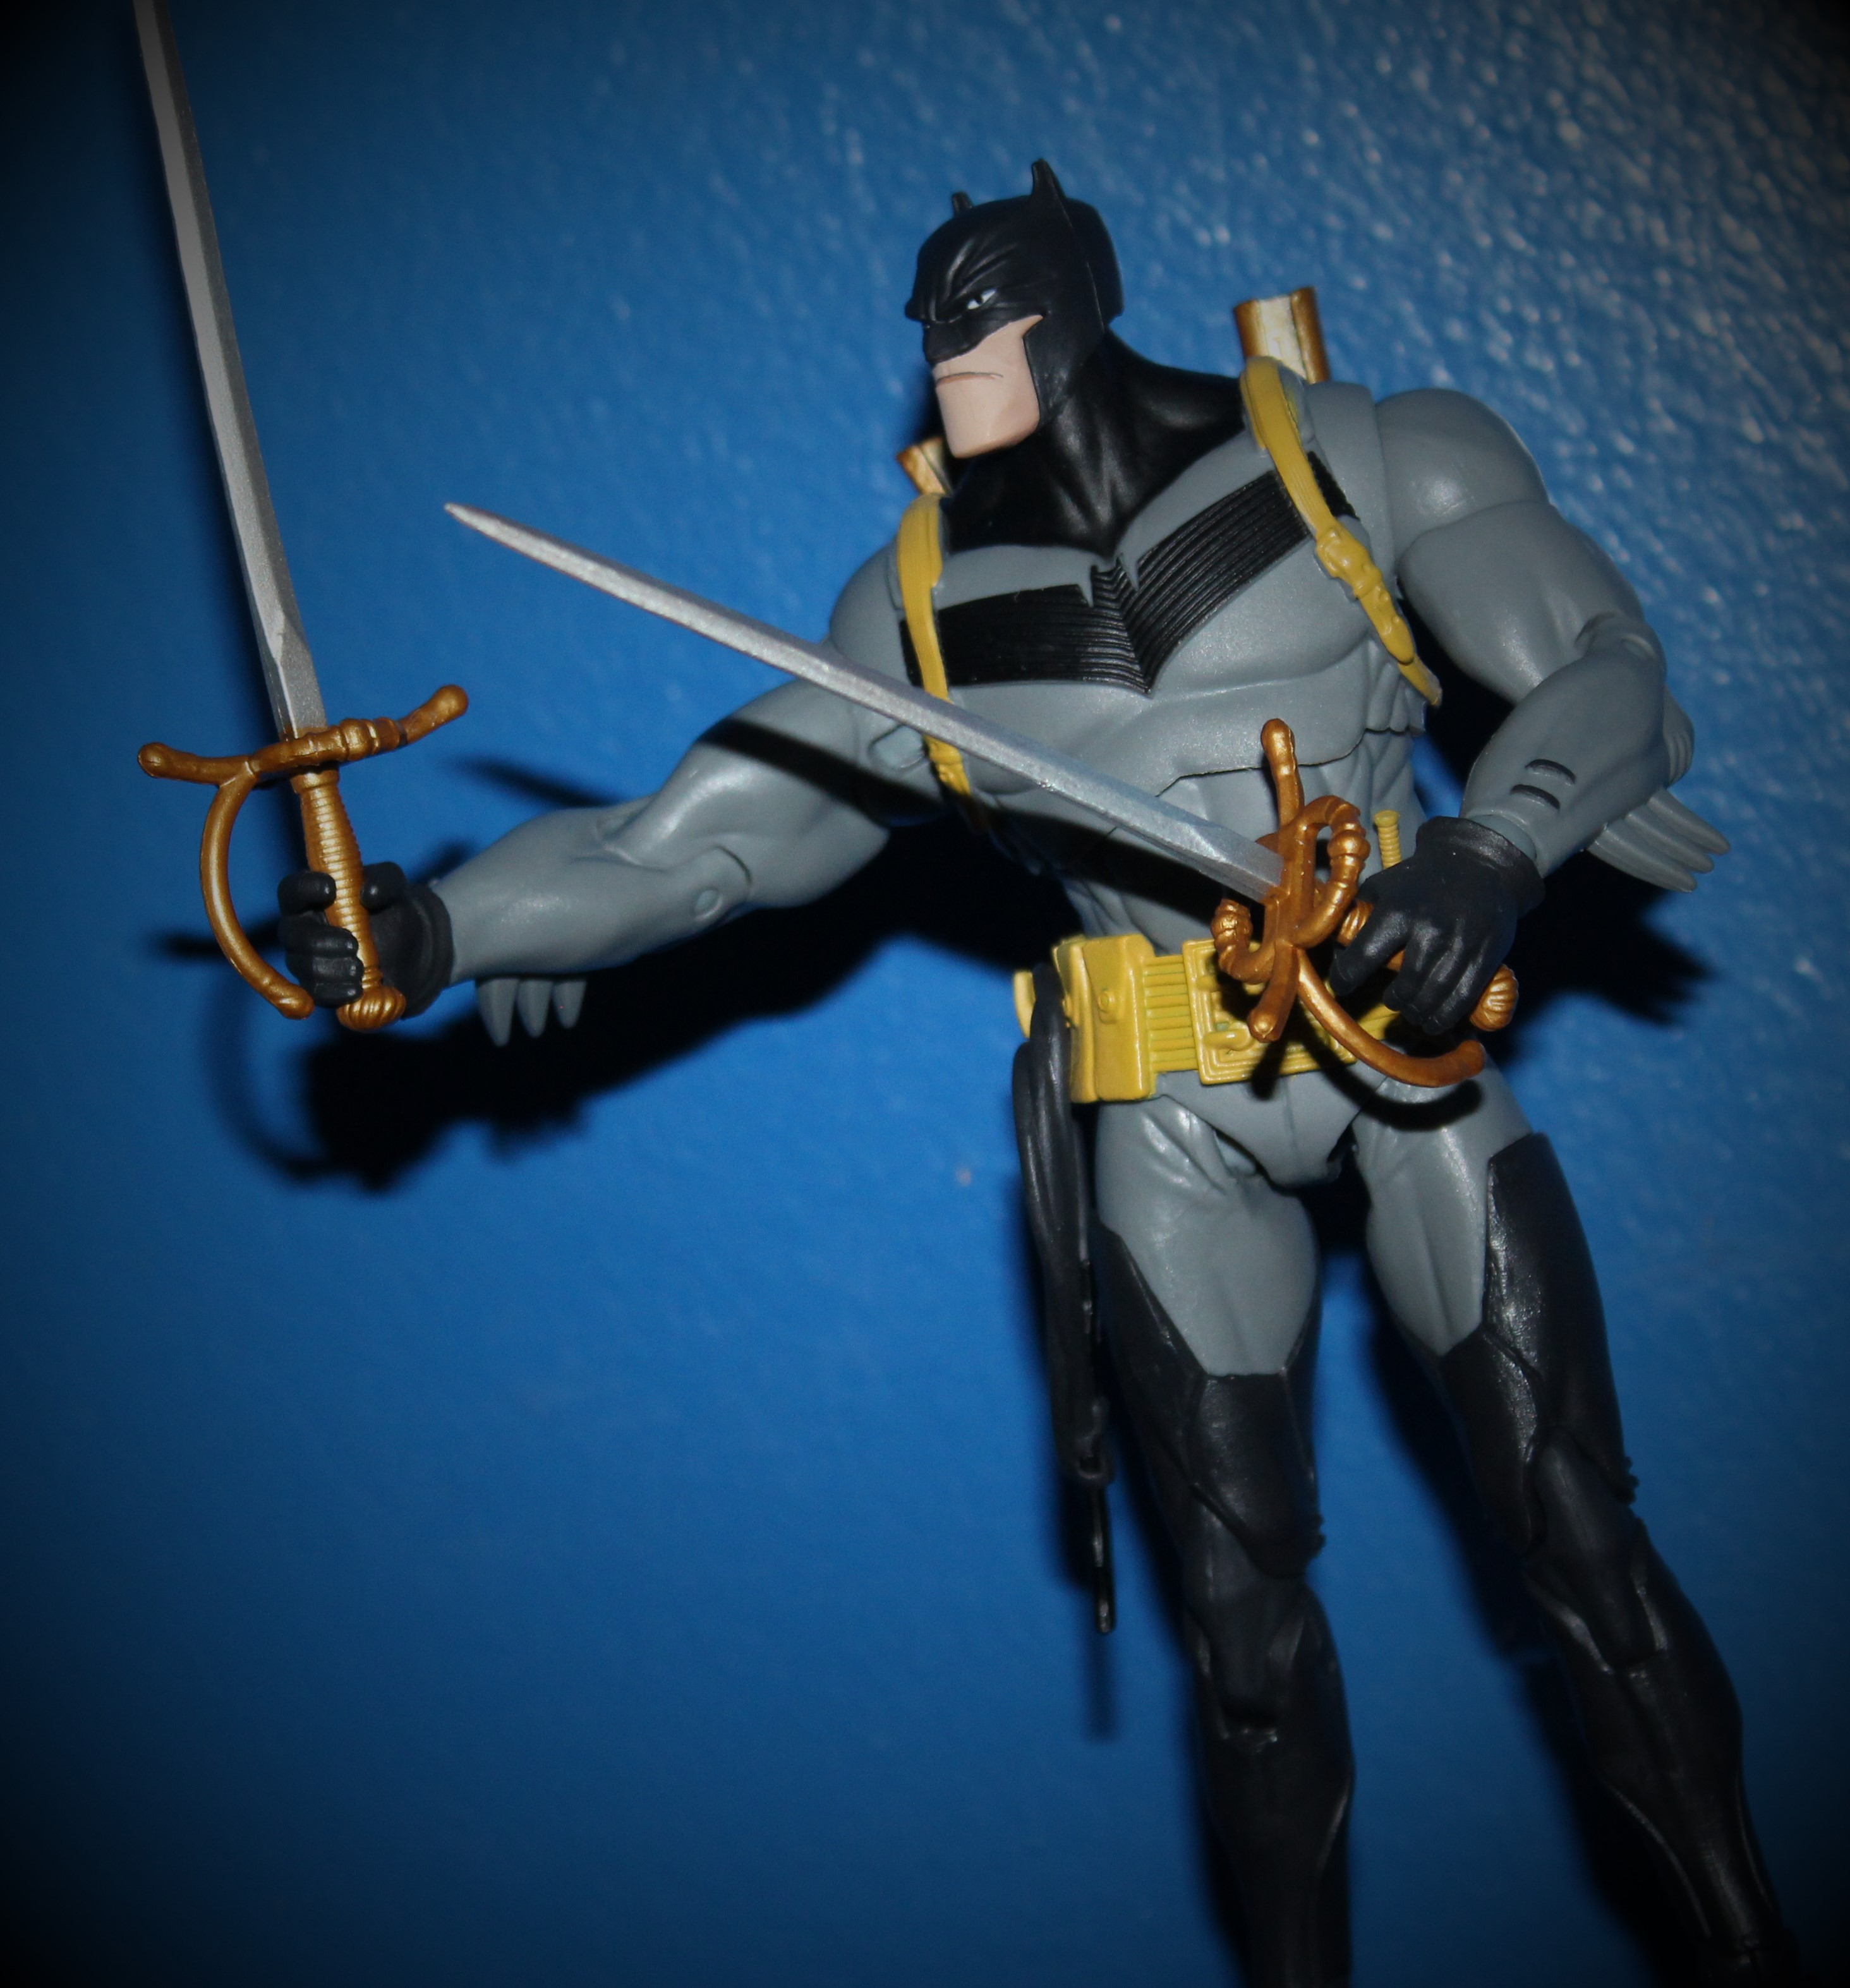 White Knight Batman with swords